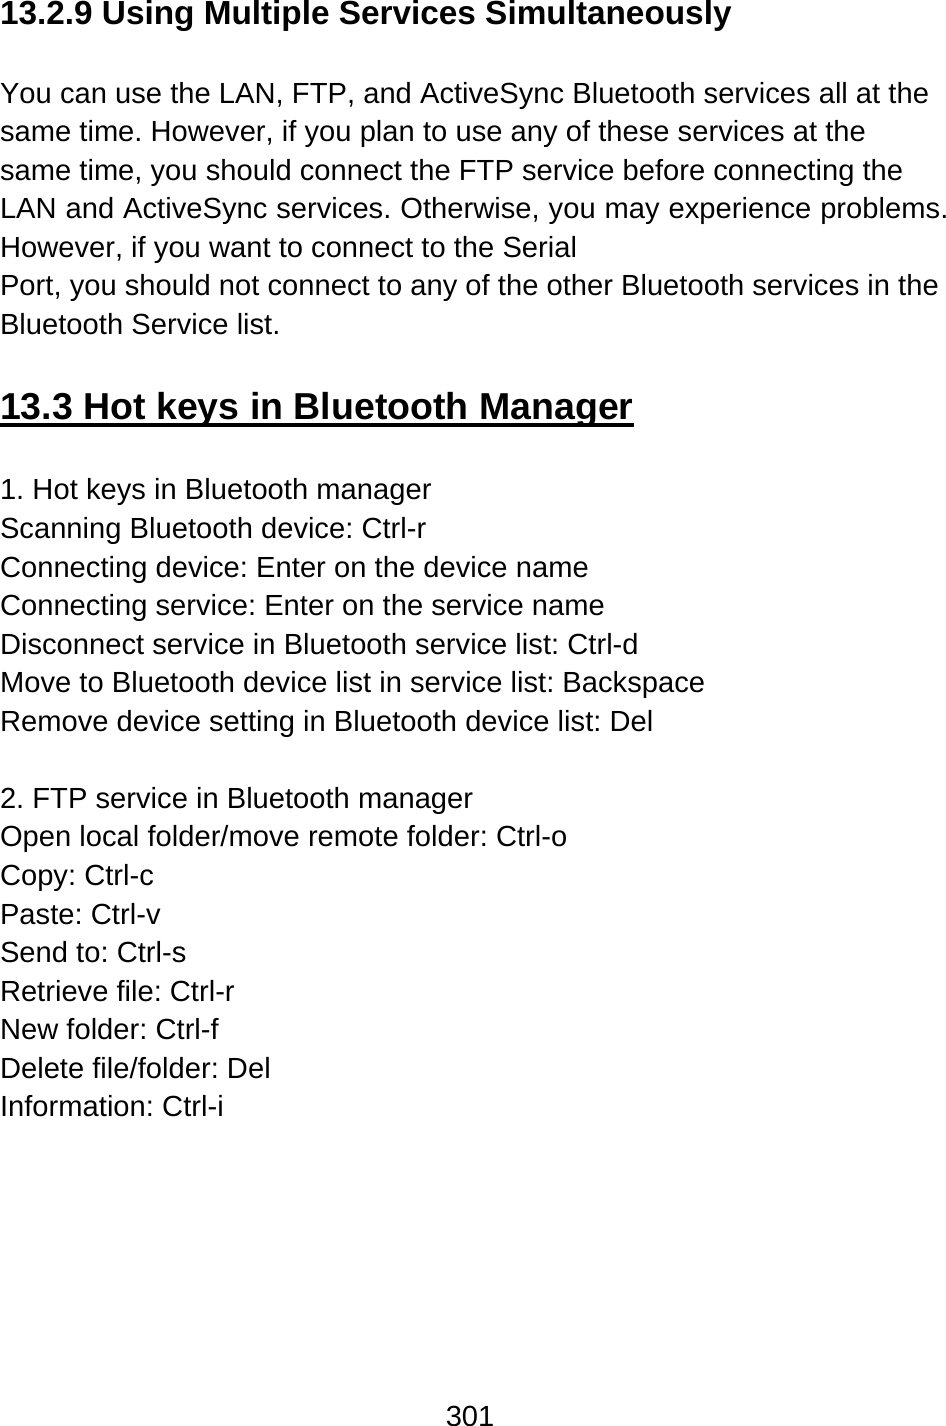 301  13.2.9 Using Multiple Services Simultaneously  You can use the LAN, FTP, and ActiveSync Bluetooth services all at the same time. However, if you plan to use any of these services at the same time, you should connect the FTP service before connecting the LAN and ActiveSync services. Otherwise, you may experience problems.   However, if you want to connect to the Serial   Port, you should not connect to any of the other Bluetooth services in the Bluetooth Service list.  13.3 Hot keys in Bluetooth Manager  1. Hot keys in Bluetooth manager Scanning Bluetooth device: Ctrl-r Connecting device: Enter on the device name Connecting service: Enter on the service name Disconnect service in Bluetooth service list: Ctrl-d   Move to Bluetooth device list in service list: Backspace Remove device setting in Bluetooth device list: Del    2. FTP service in Bluetooth manager Open local folder/move remote folder: Ctrl-o   Copy: Ctrl-c Paste: Ctrl-v   Send to: Ctrl-s Retrieve file: Ctrl-r New folder: Ctrl-f Delete file/folder: Del Information: Ctrl-i 